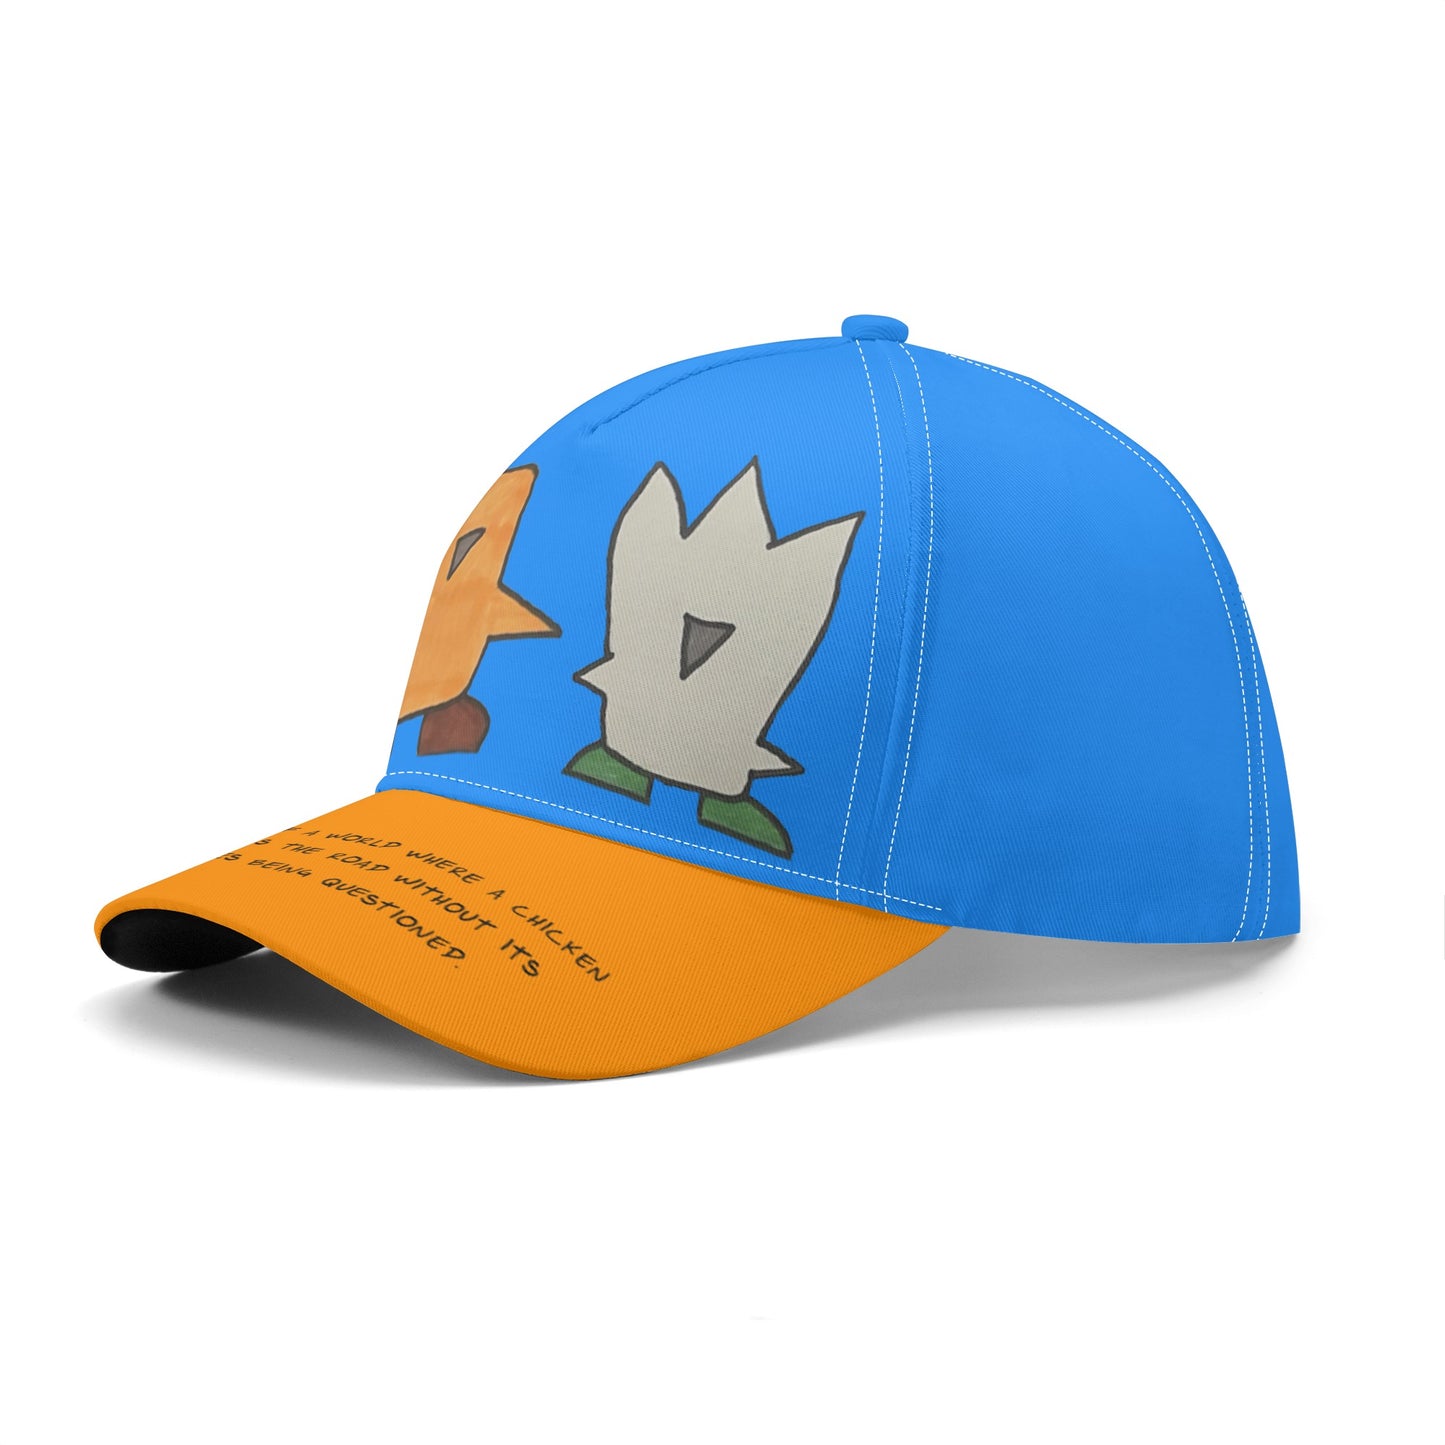 'I dream of a world' Baseball Cap in Blue/Orange with Fuzzy and Muffin artwork by D.B.